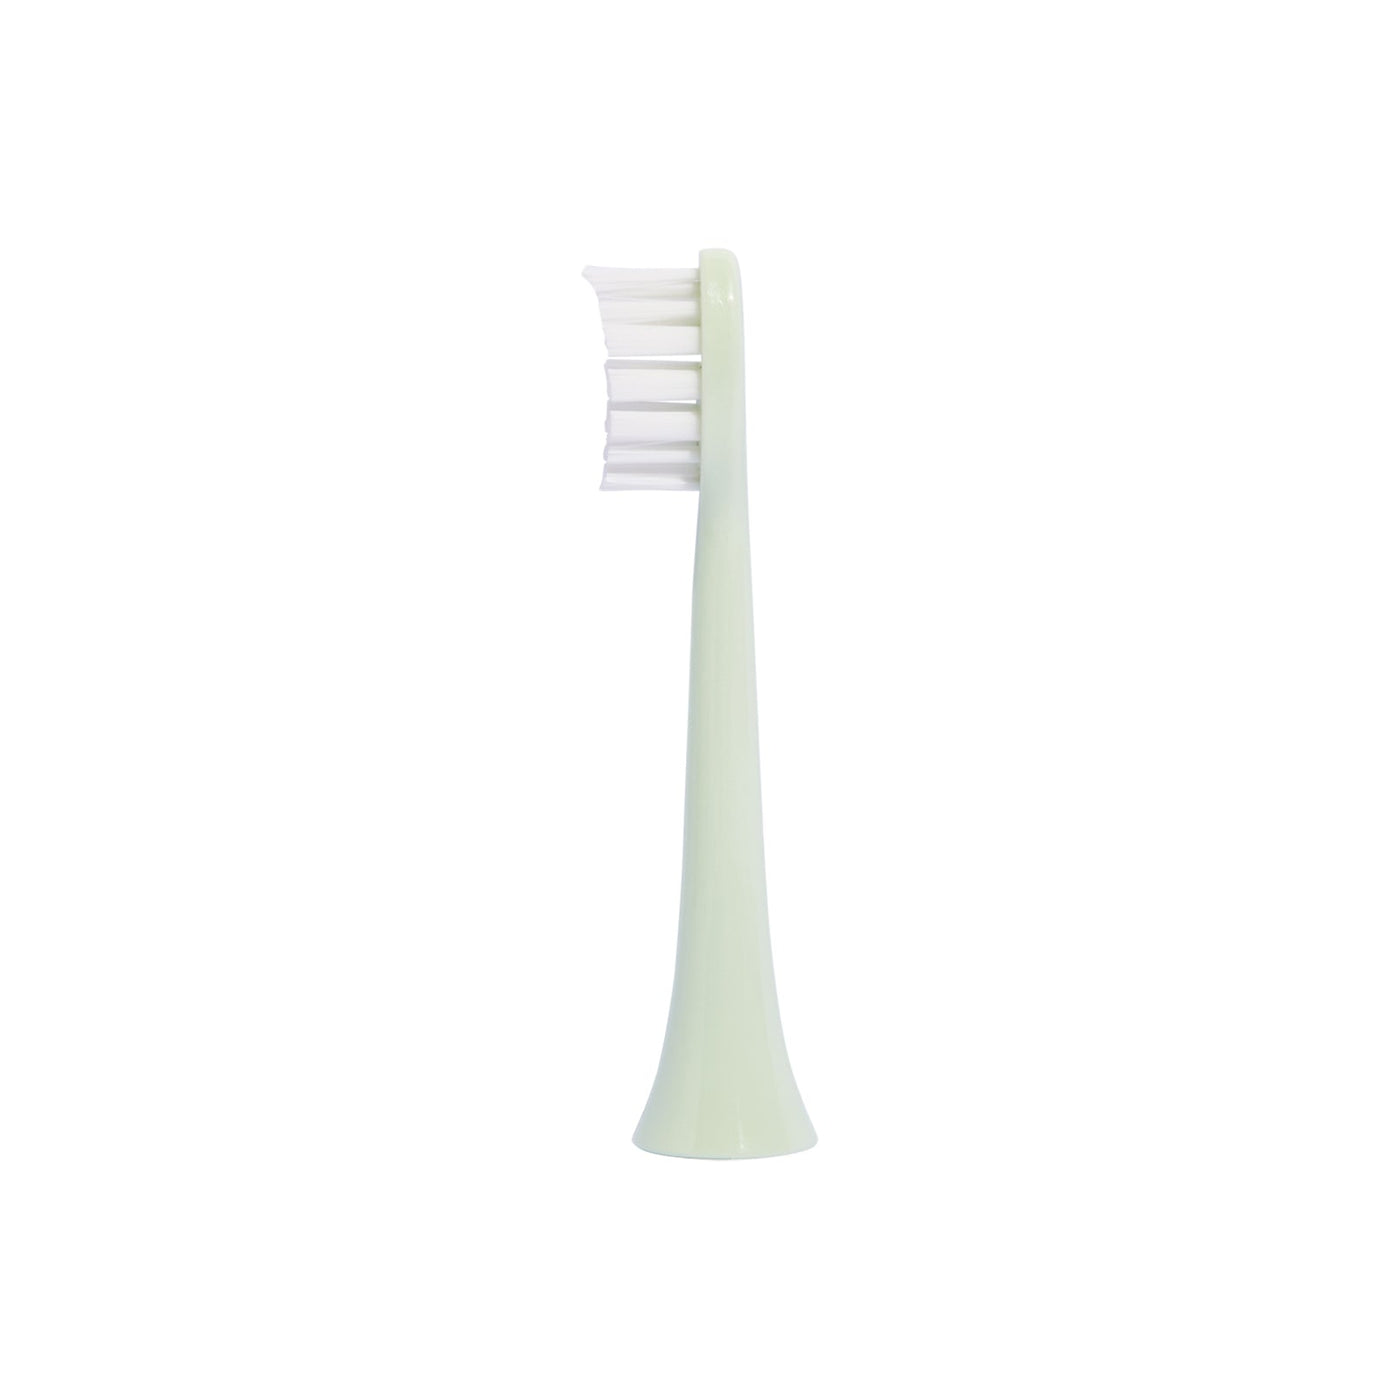 Gem Electric Toothbrush Replacement Heads Mint